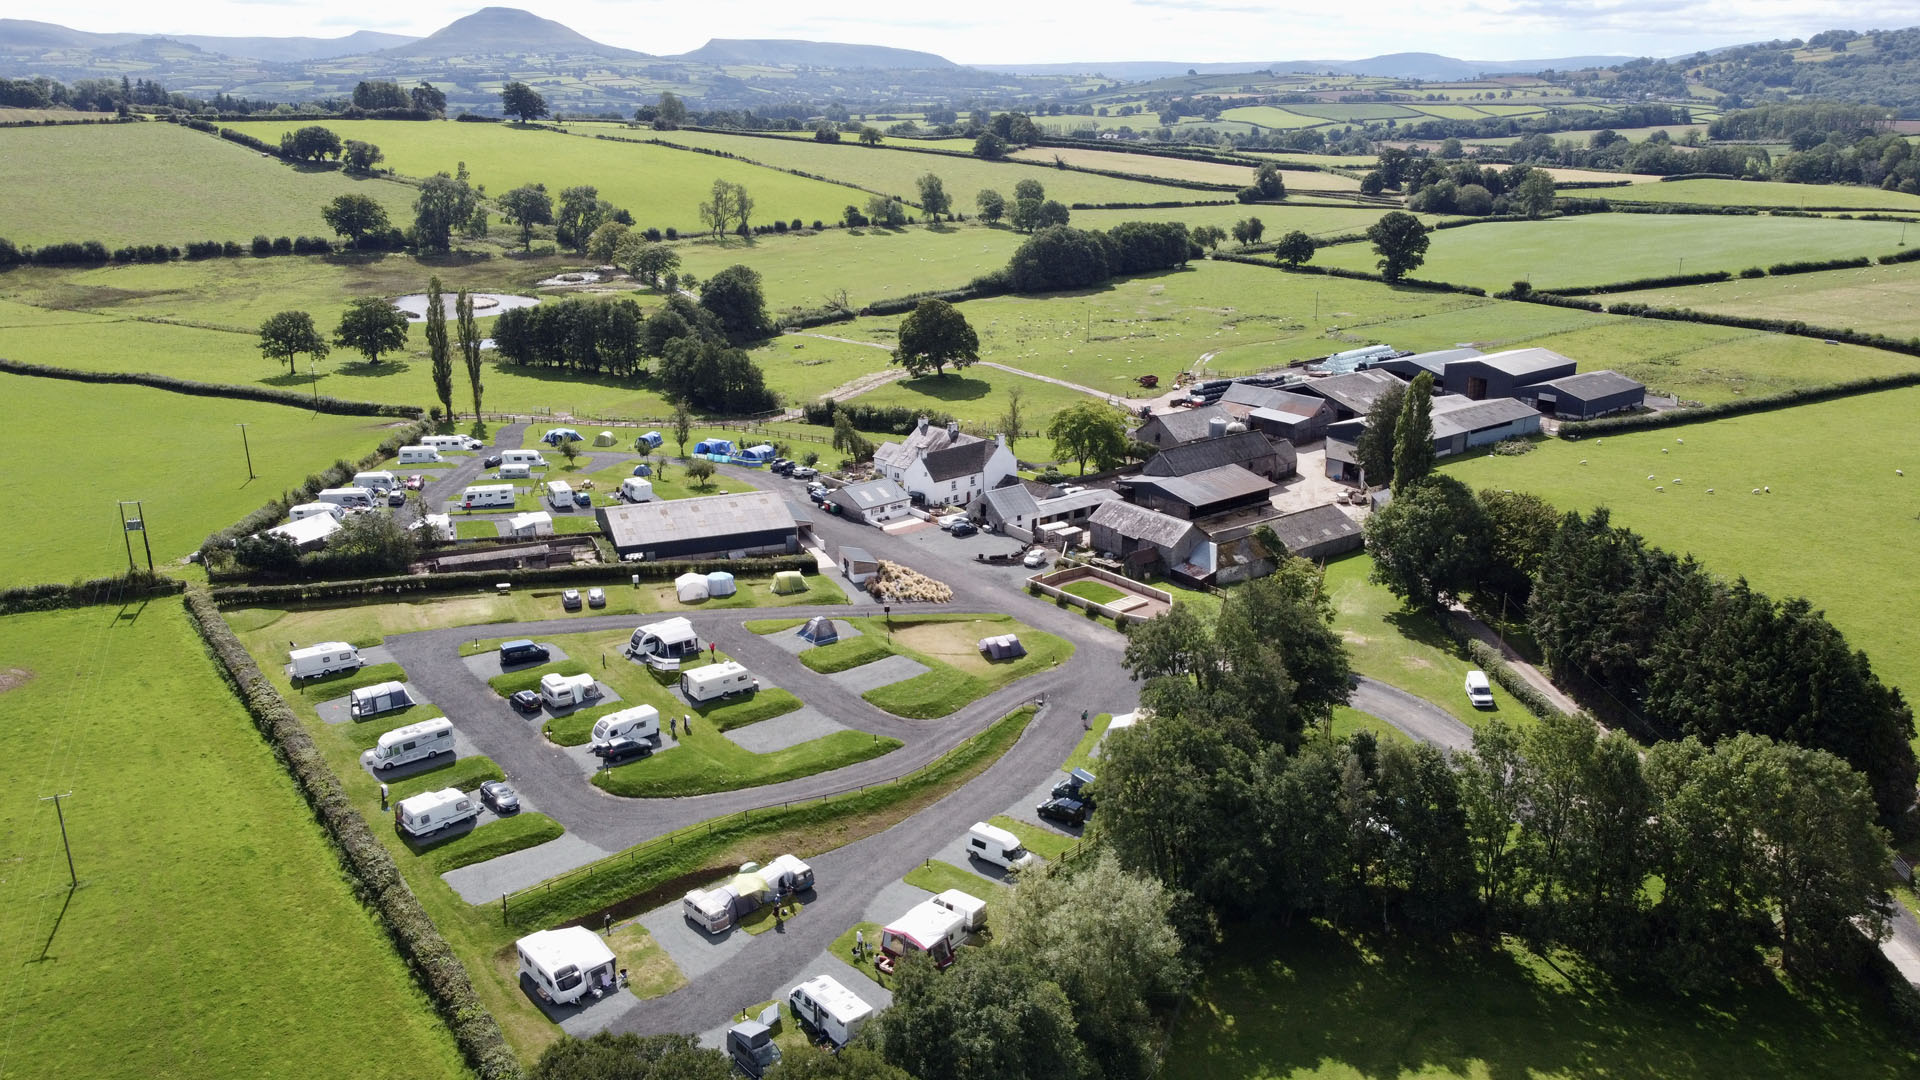 places to stay in brecon, brecon beacons activities, brecon b&b guest houses, 